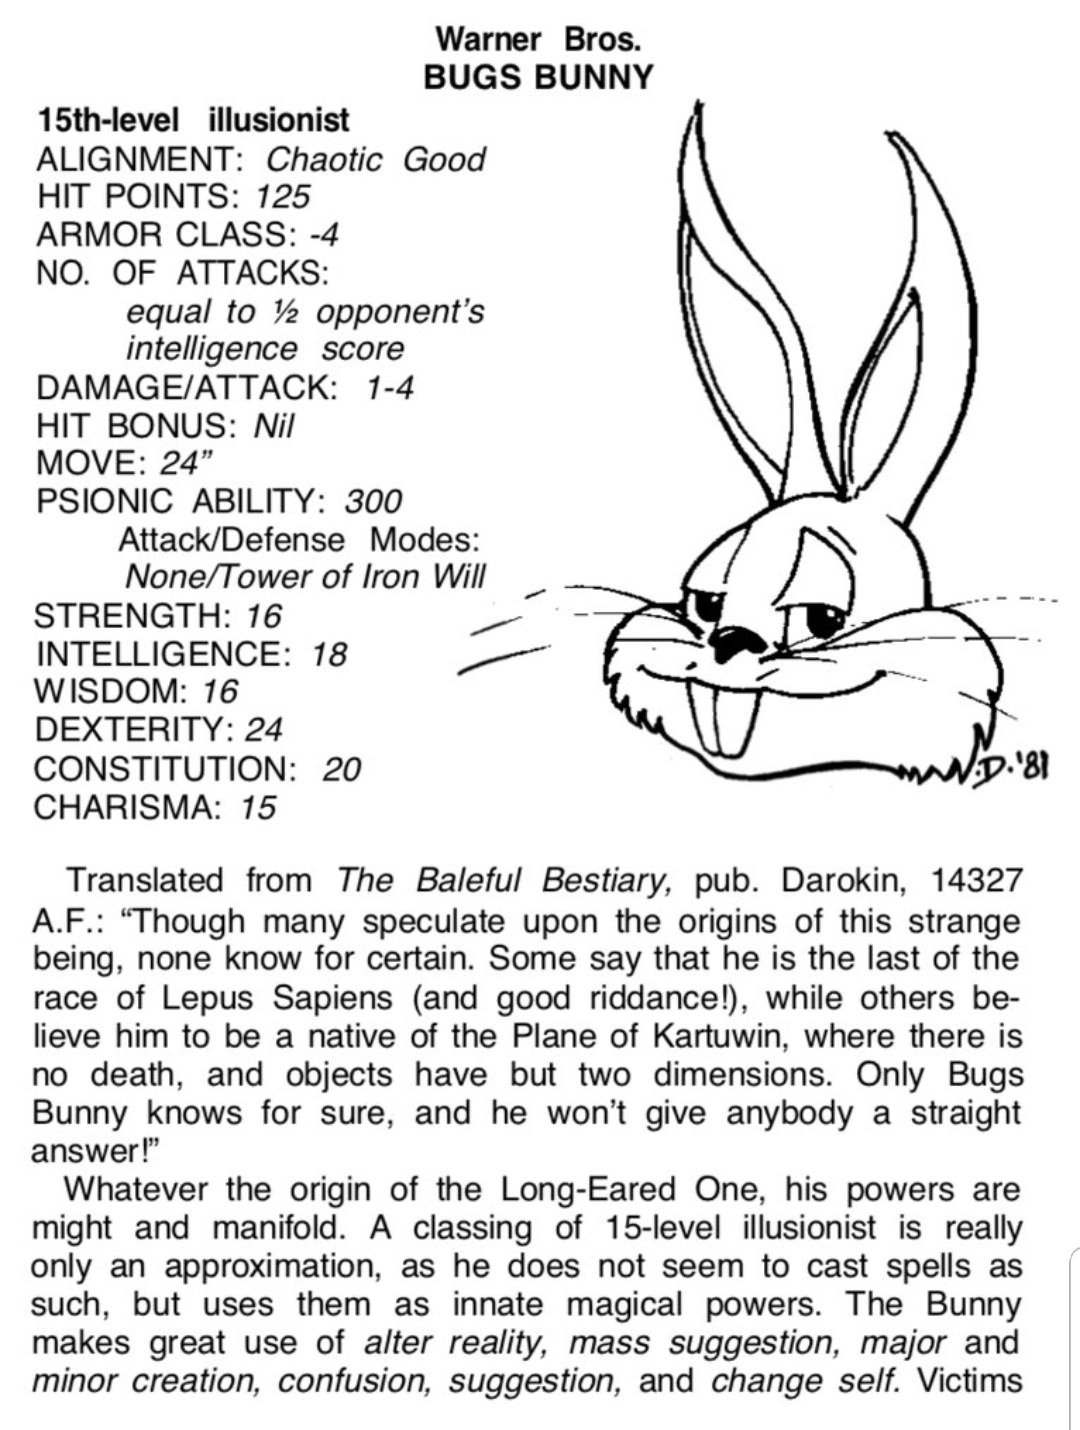 Shocking Reveal Of The Day- Bugs Bunny Is An Advanced Dungeons And Dragons Character